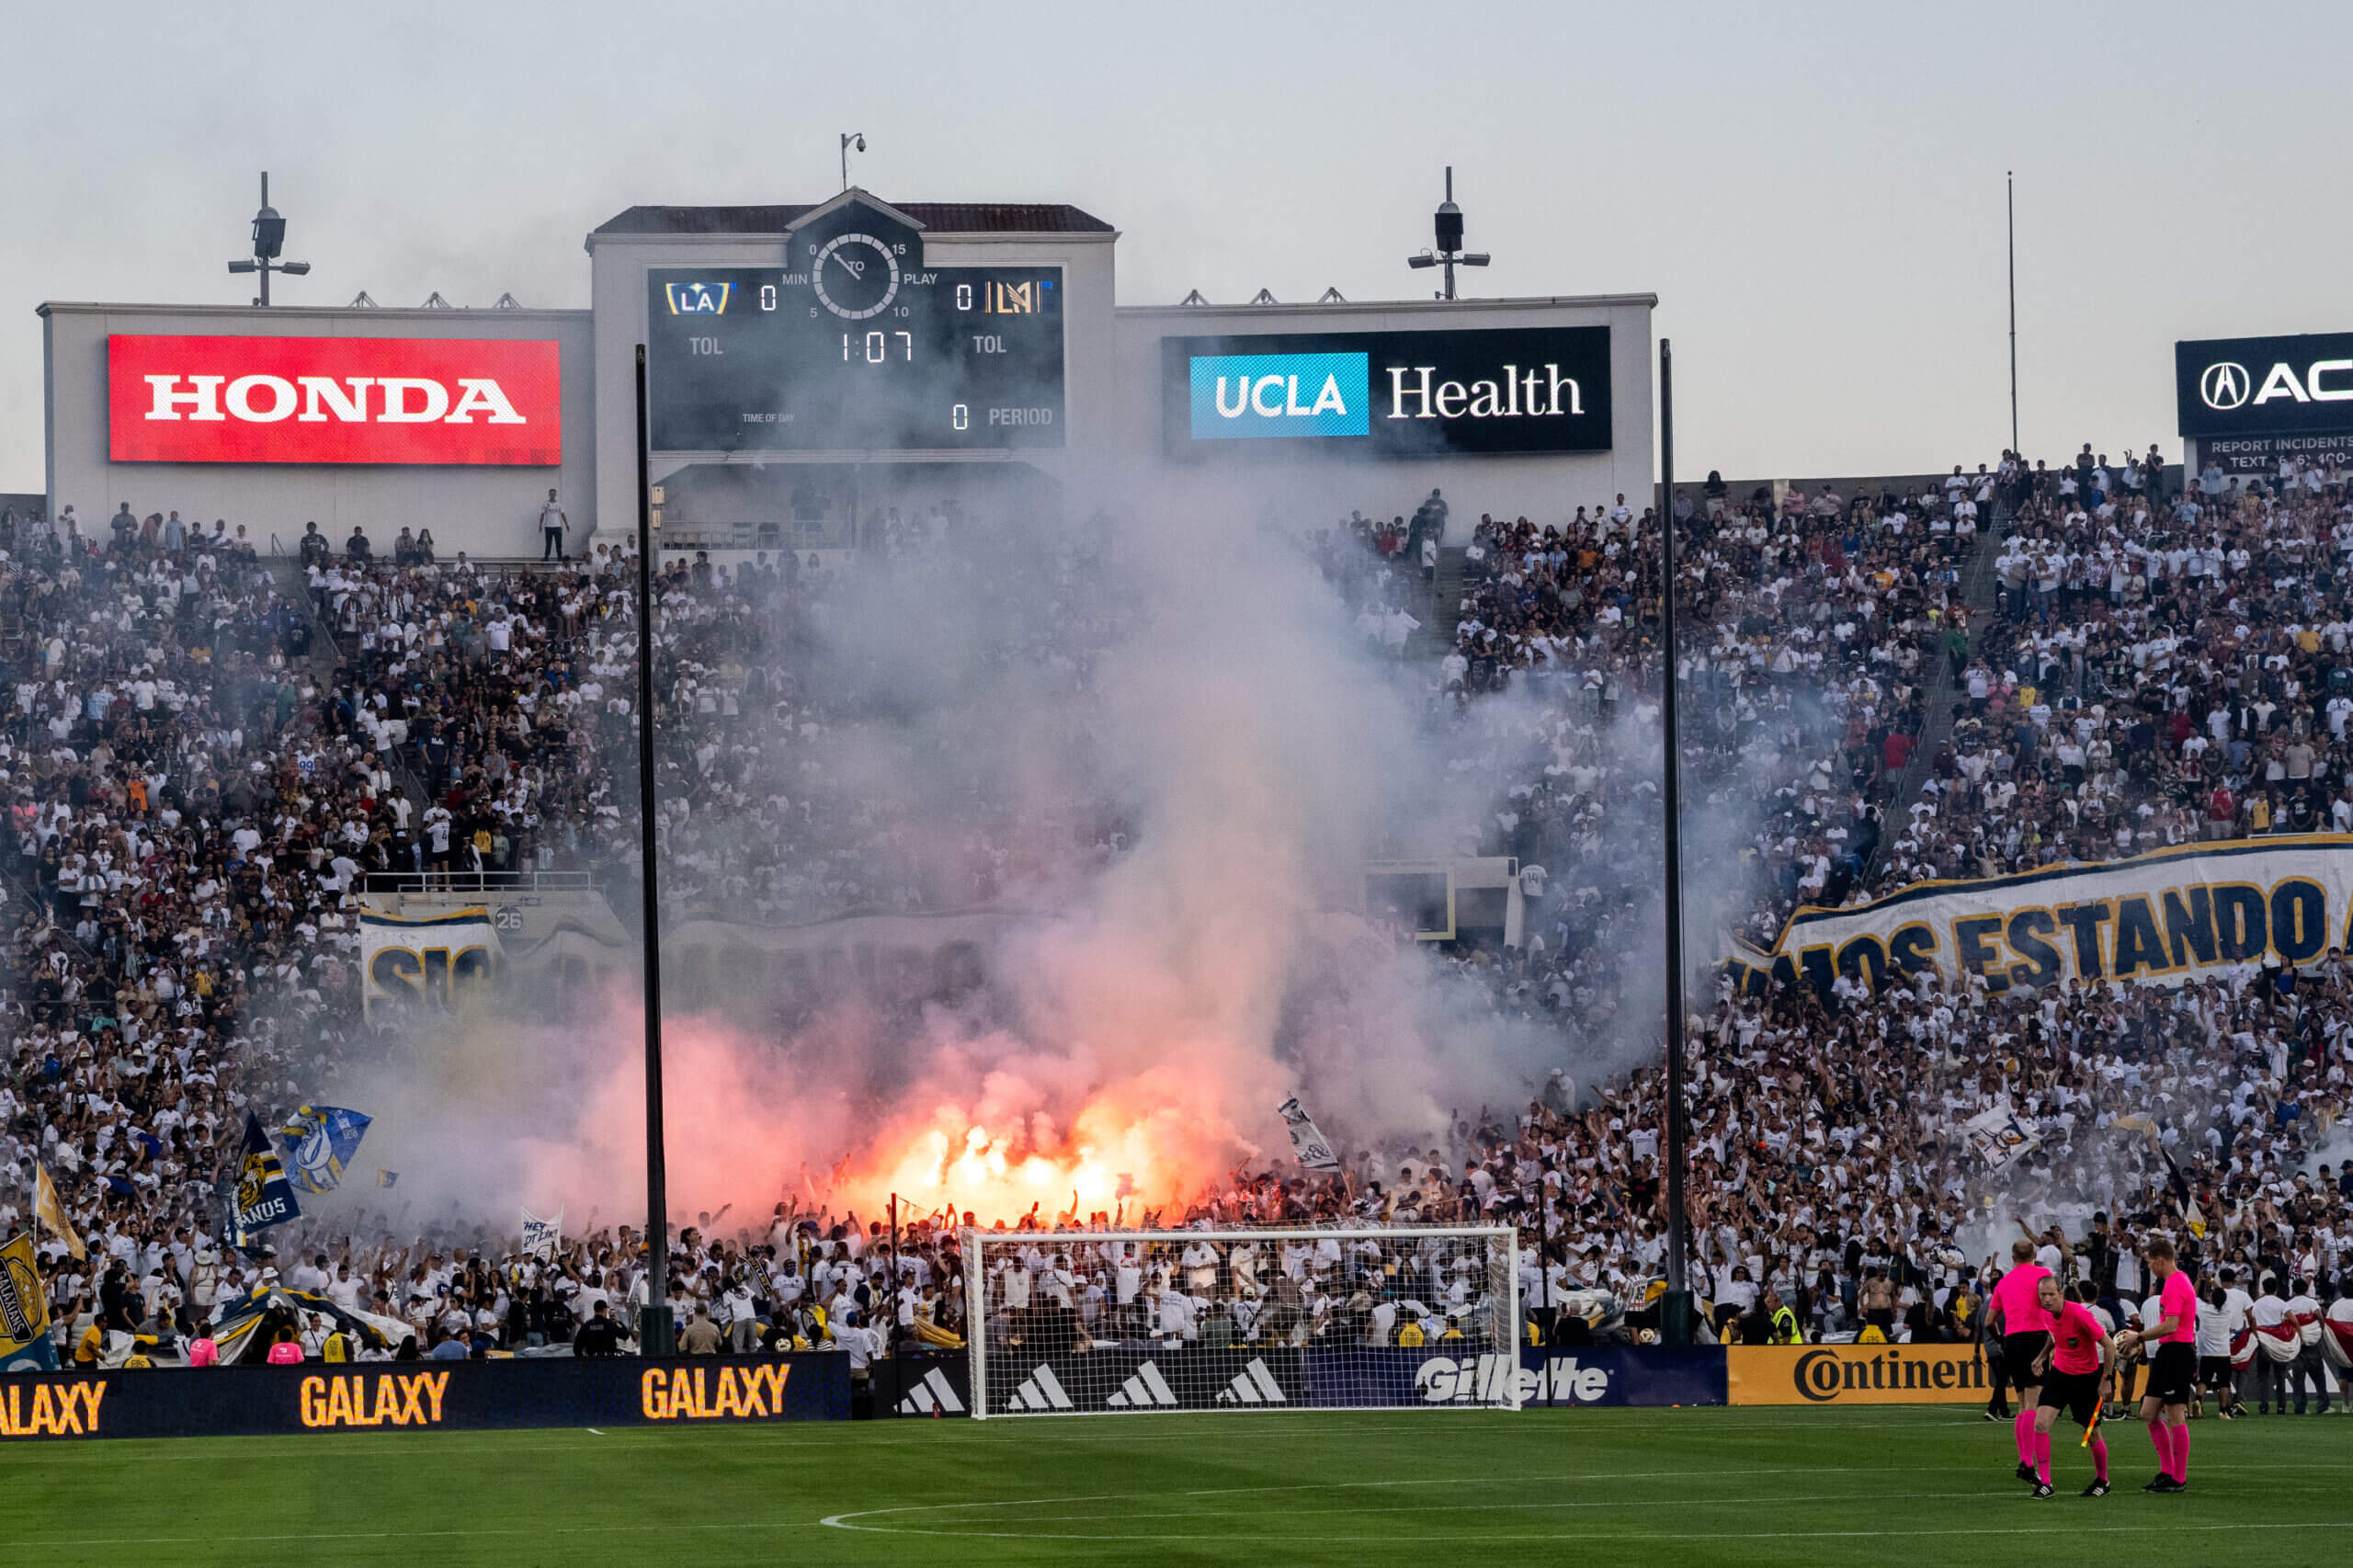 Galaxy fined $100K after supporter group misconduct